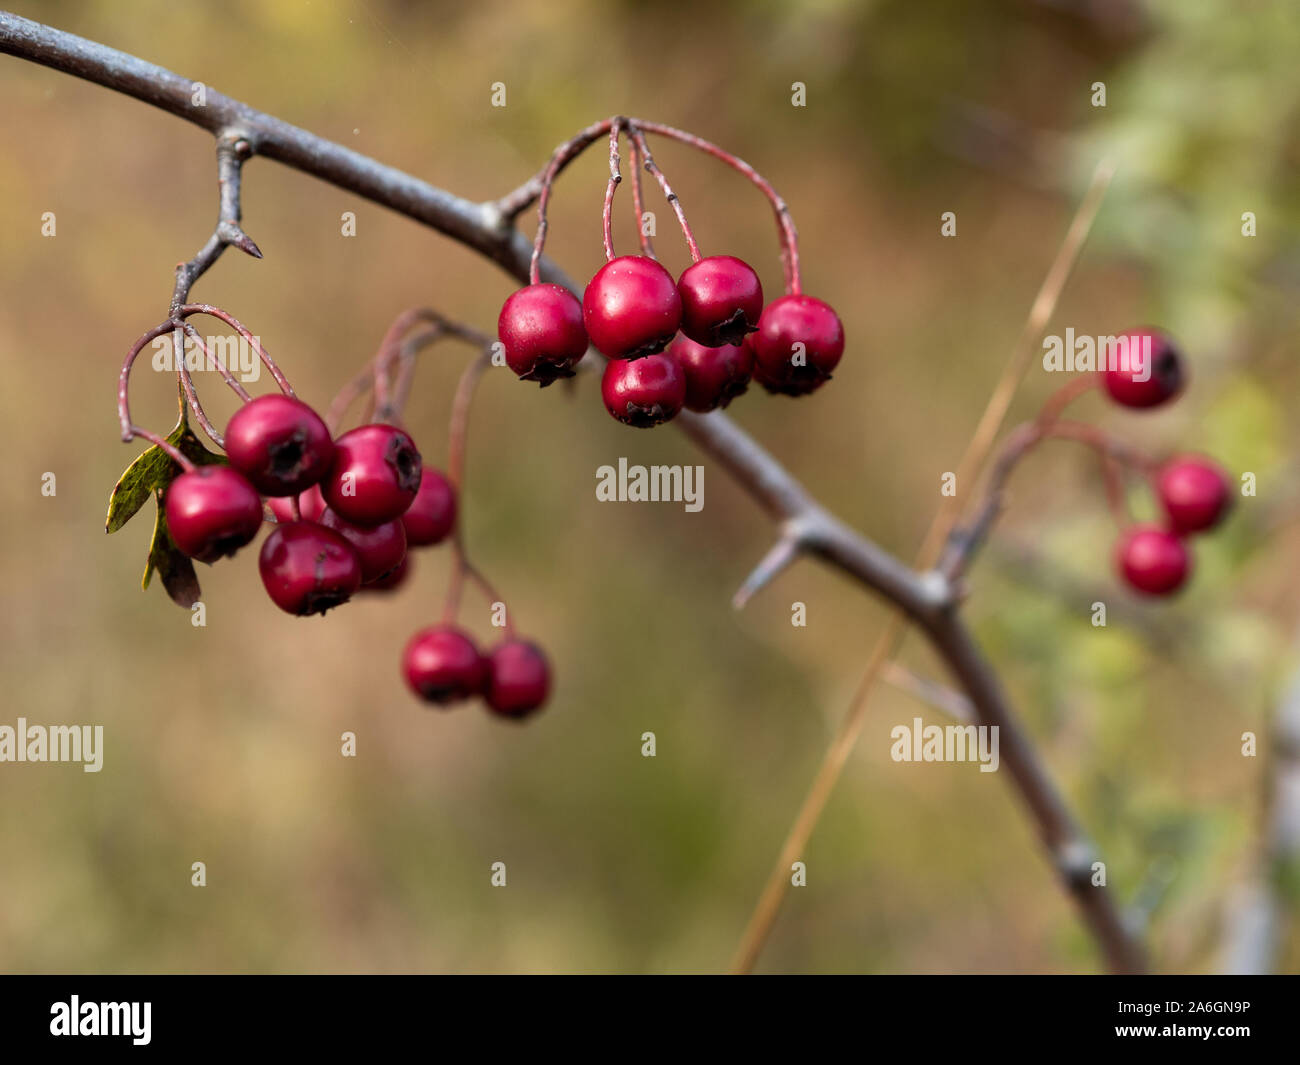 Close up of Hawthorn berries on single branch in autumn/fall. Stock Photo